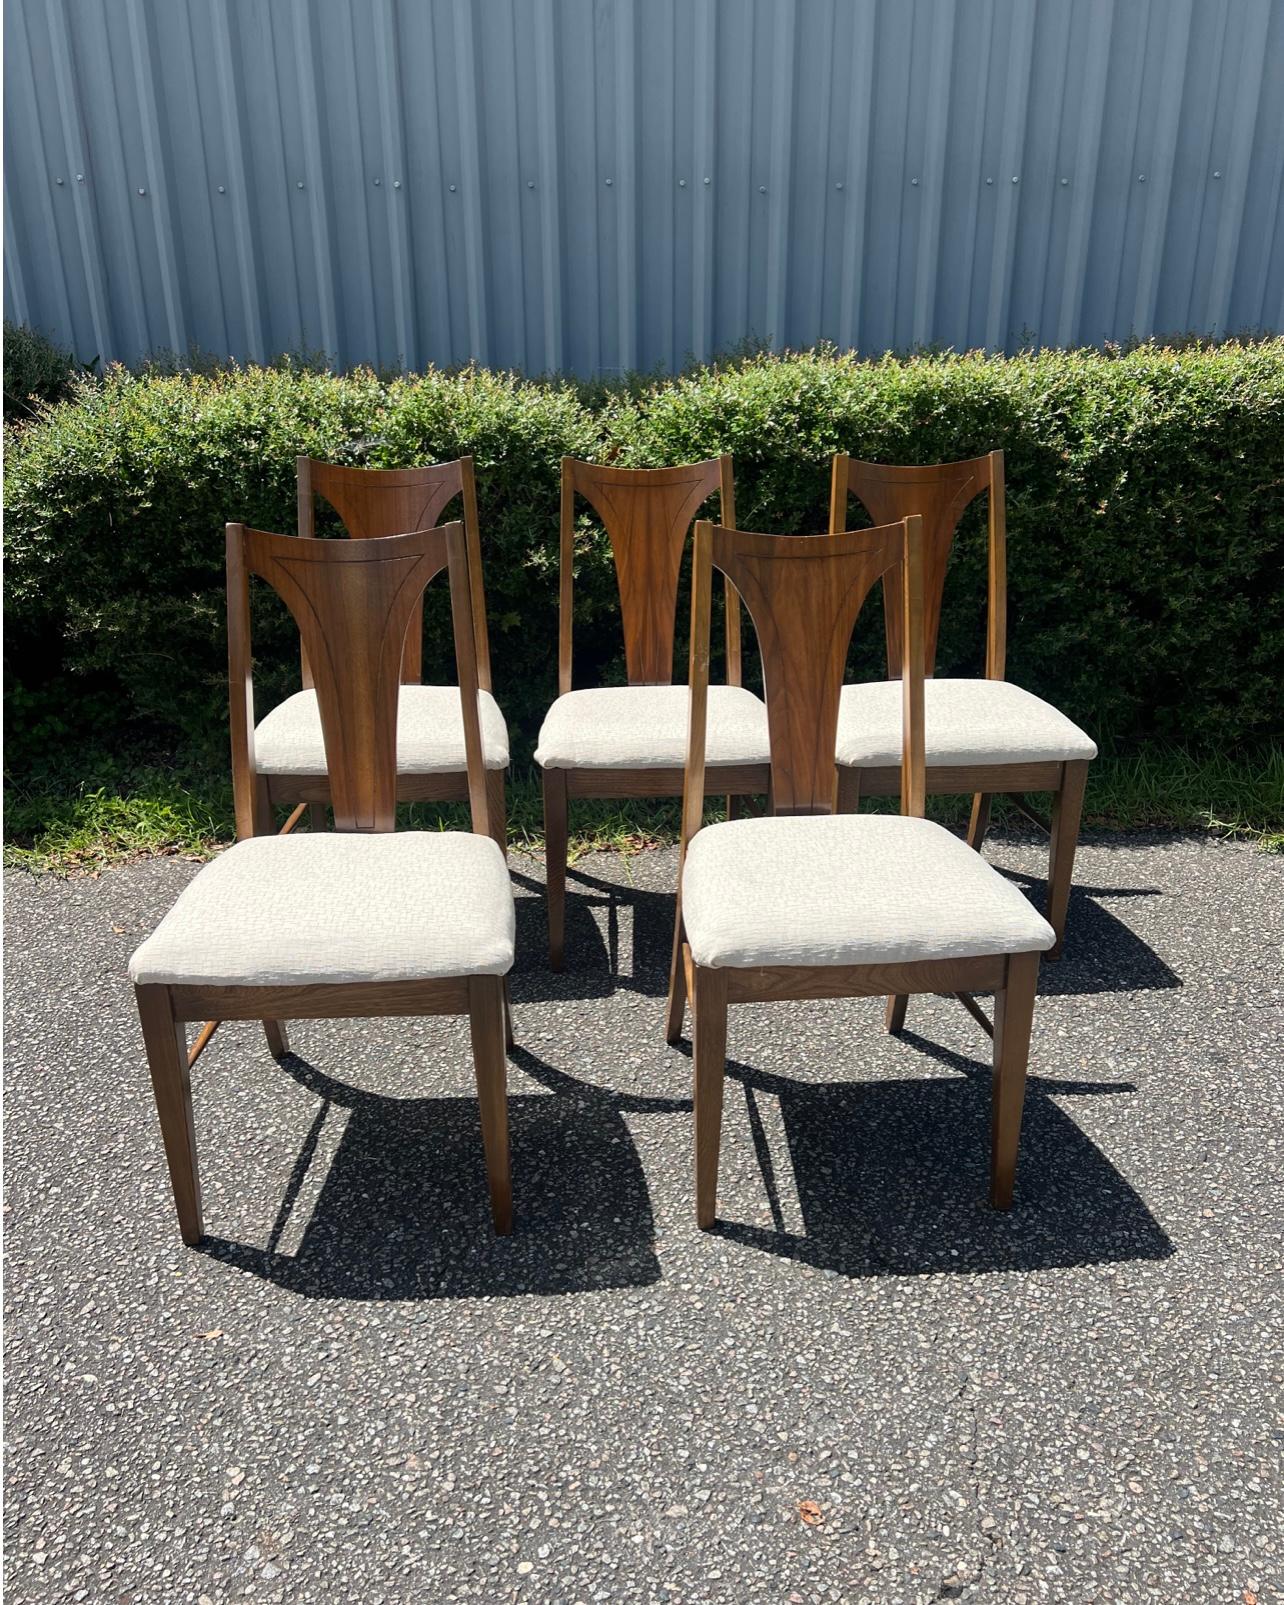 A set of 5 Broyhill Brasilia II Mid-Century Modern Dining Chairs. Circa 1960’s. All of the chairs are structurally sound with very minor blemishes to the wood.
We also have the coordinating dining table in the shop.  